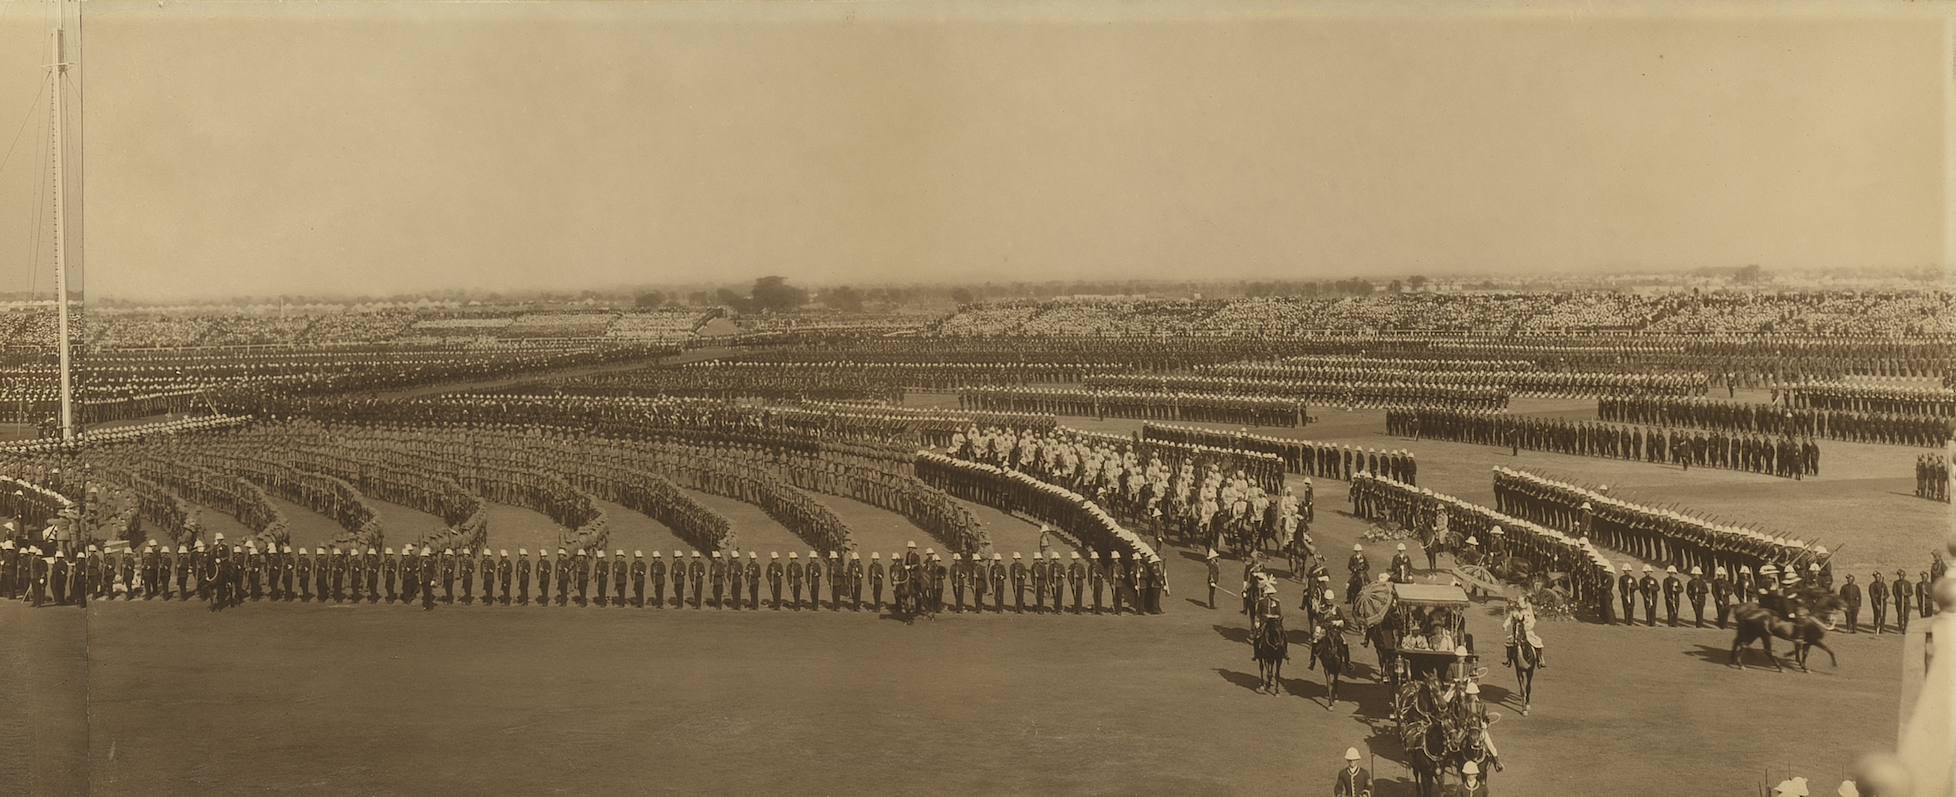 Third gelatin silver photograph framed alongside each other to form a panorama of three individual key moments taken during the Delhi Durbar of 1911. Each photograph features King George V and Queen Mary.